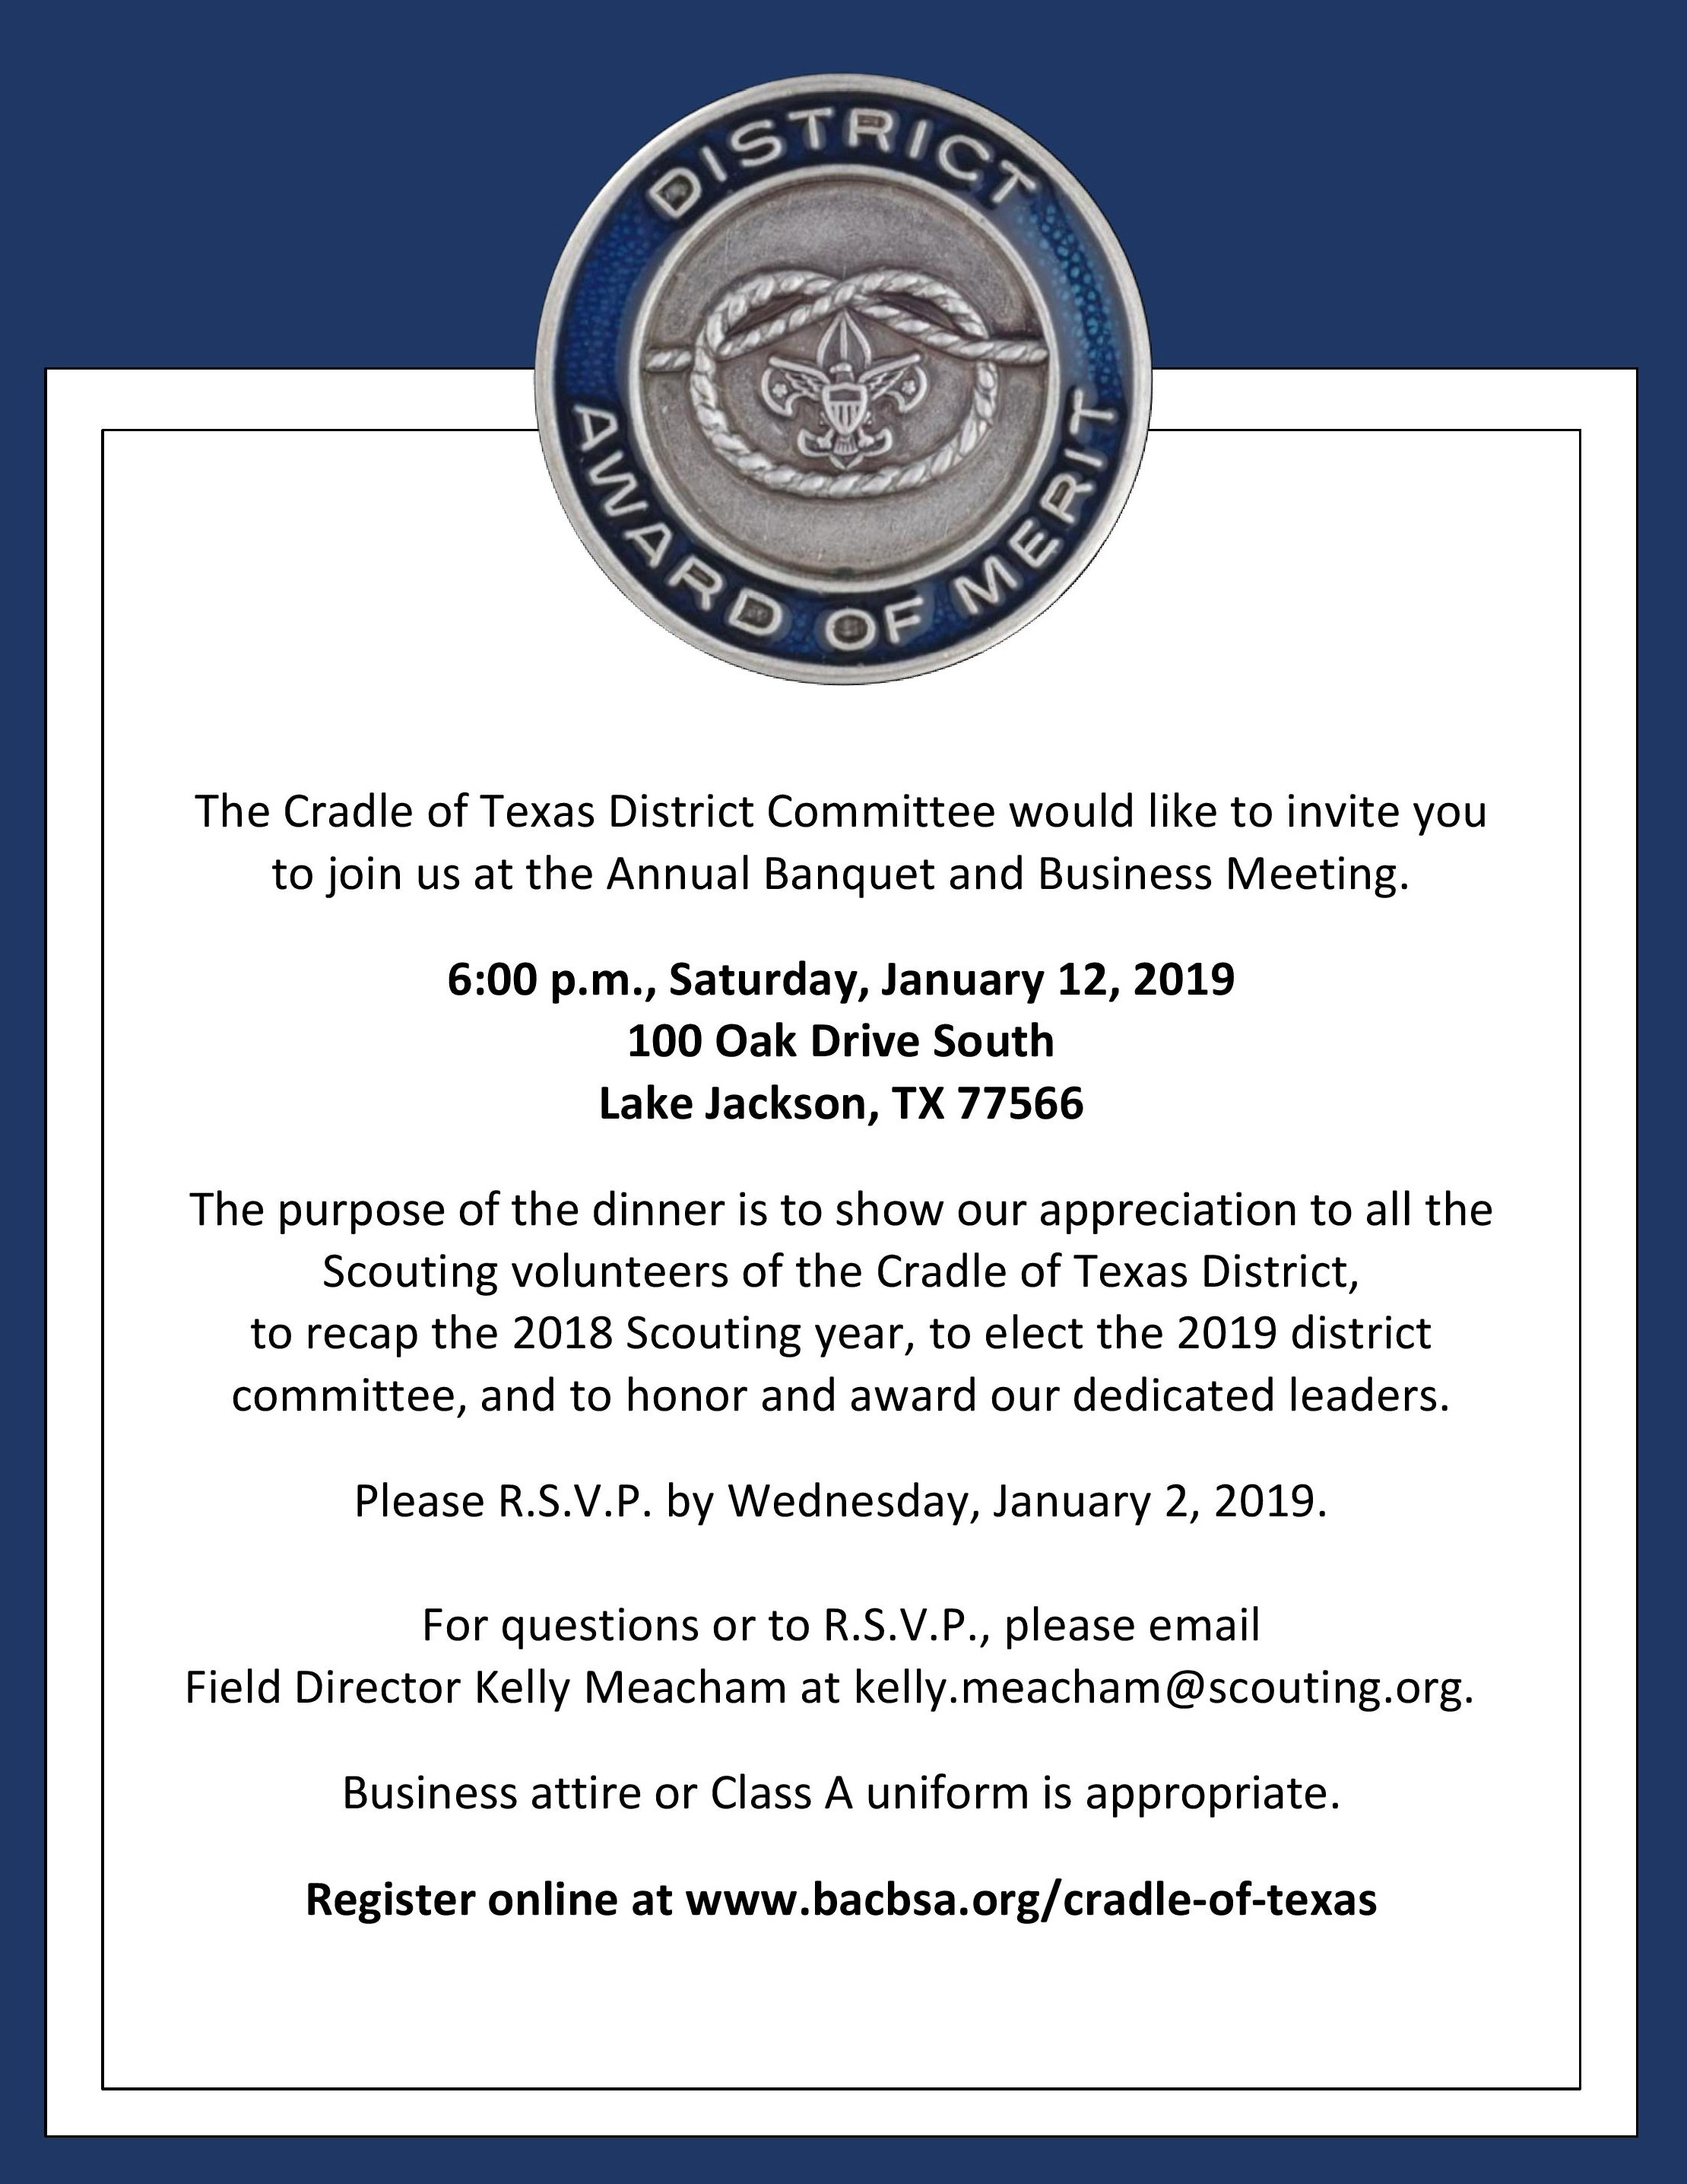 Cradle of Texas Annual Banquet & Business Meeting